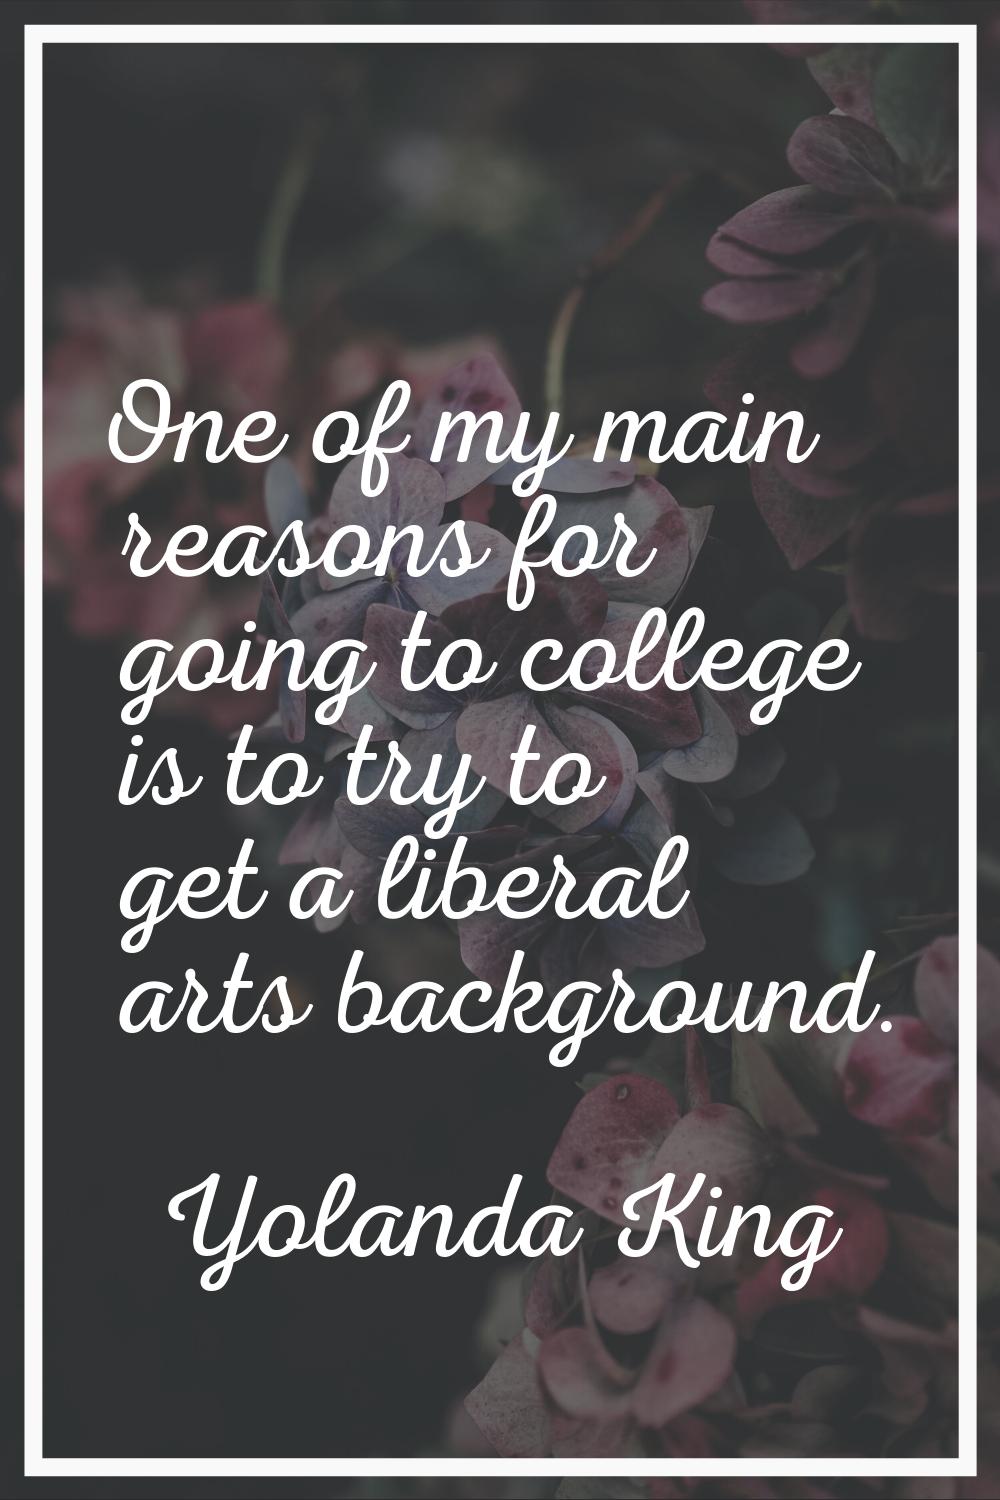 One of my main reasons for going to college is to try to get a liberal arts background.